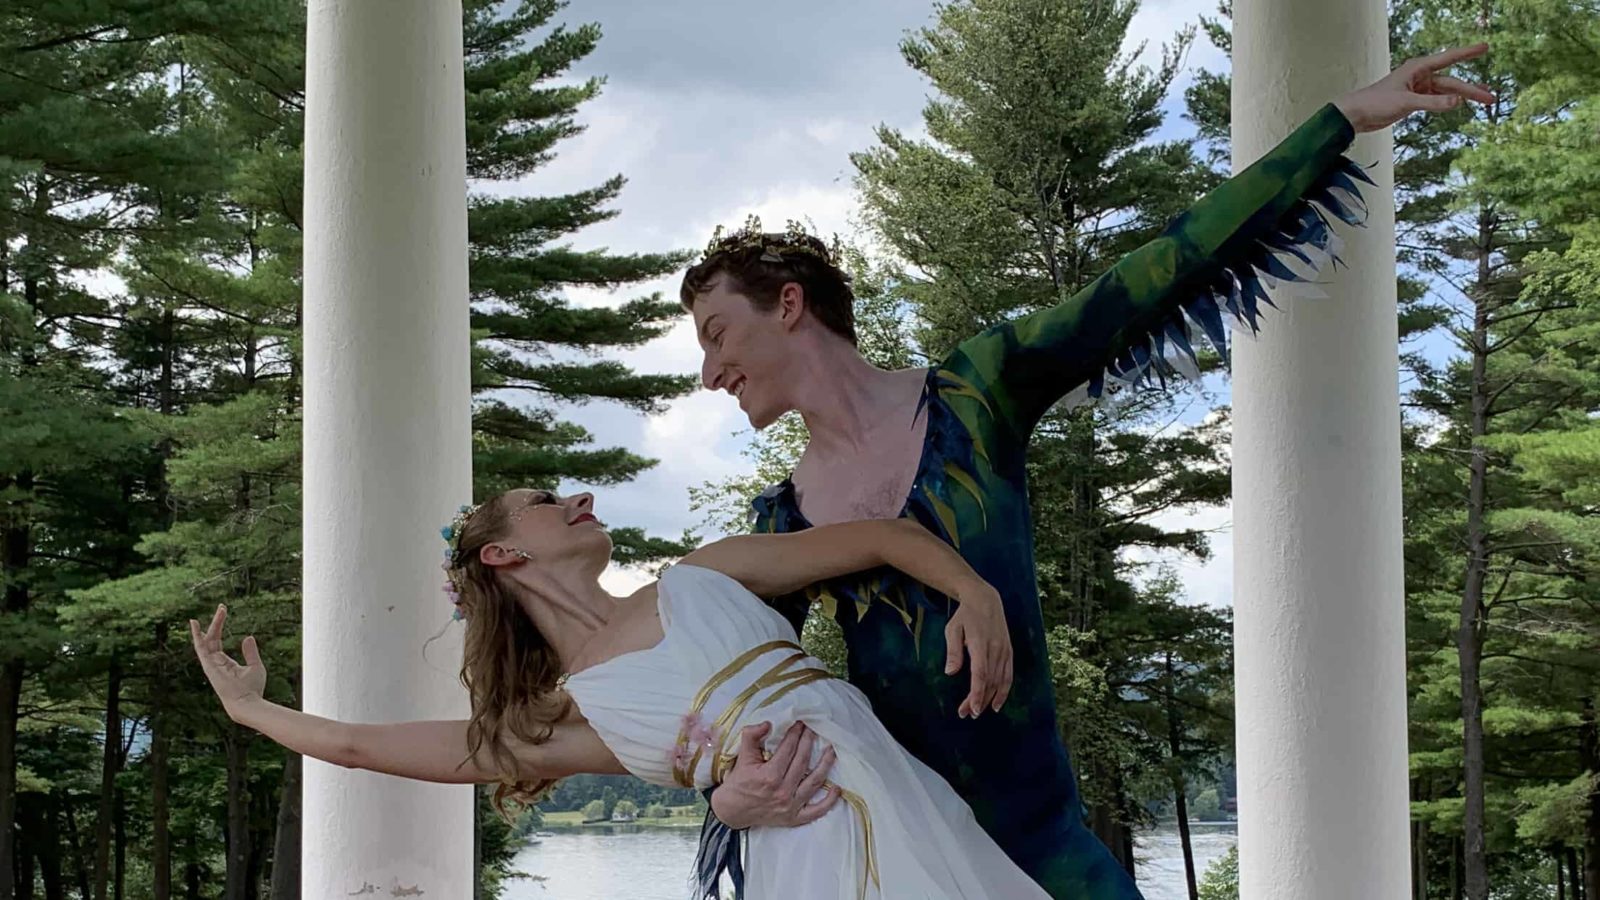 Members of Albany Berkshire Ballet's core company of professional dancers perform in a Midsummer Night's Dream.